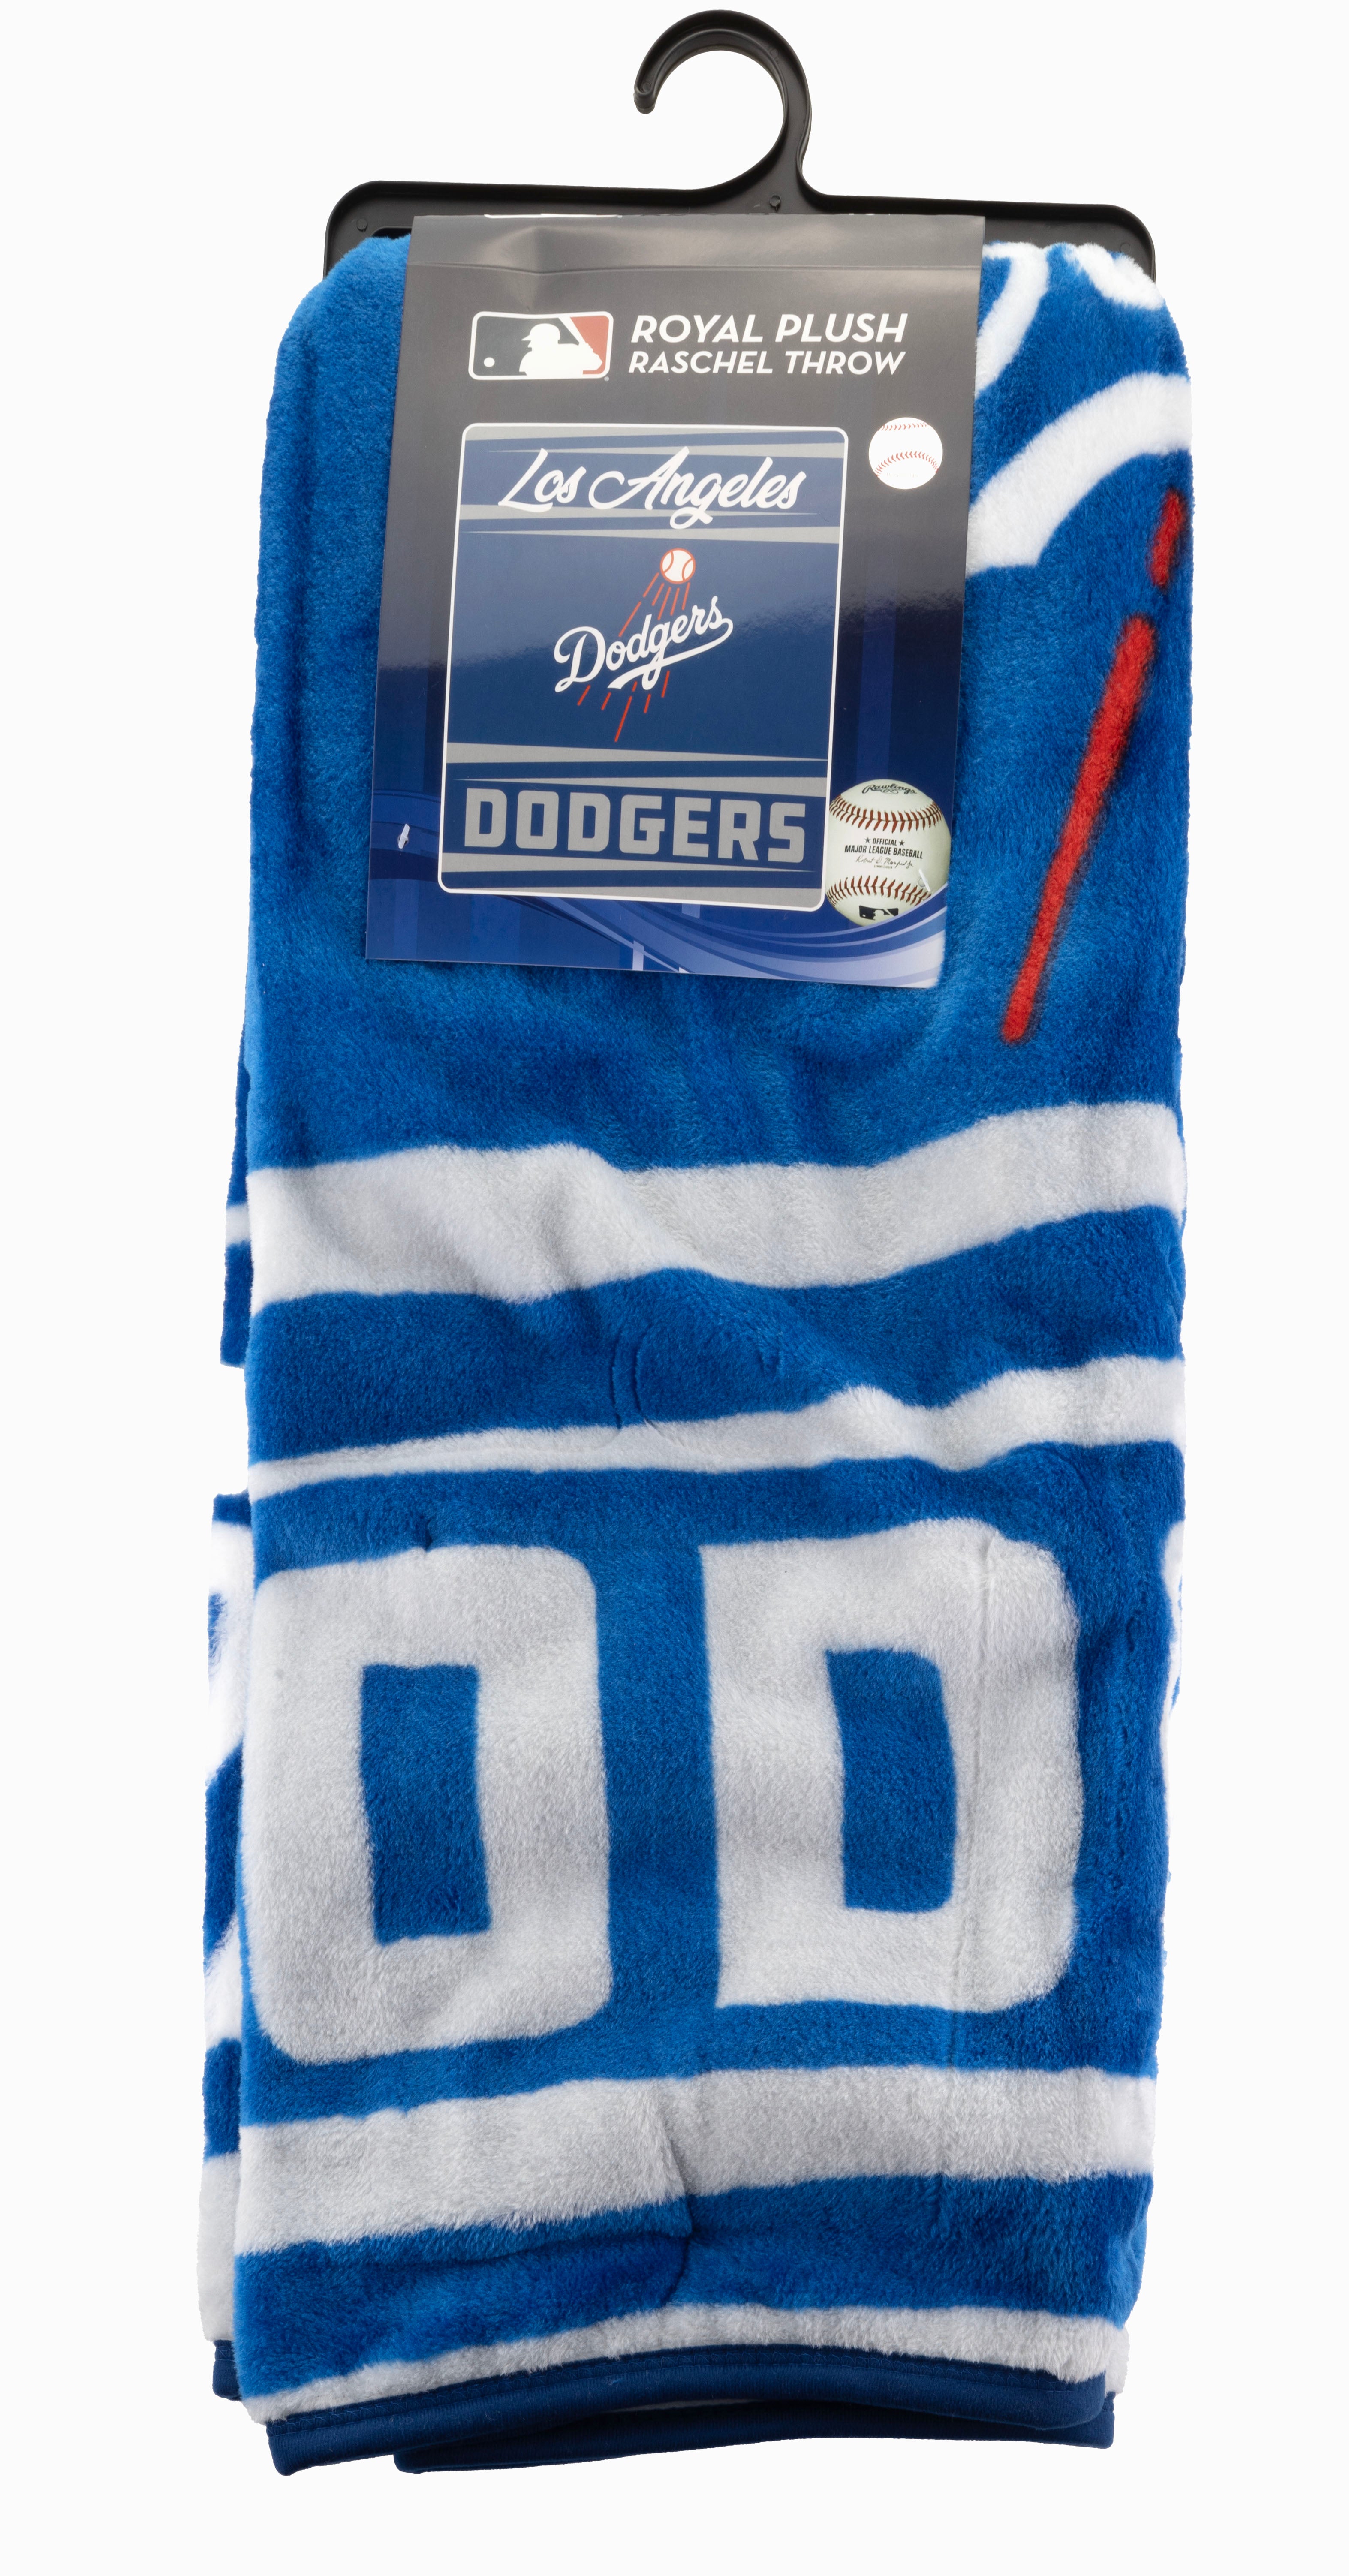 Dodgers Soft and Plush Blanket Pk 2